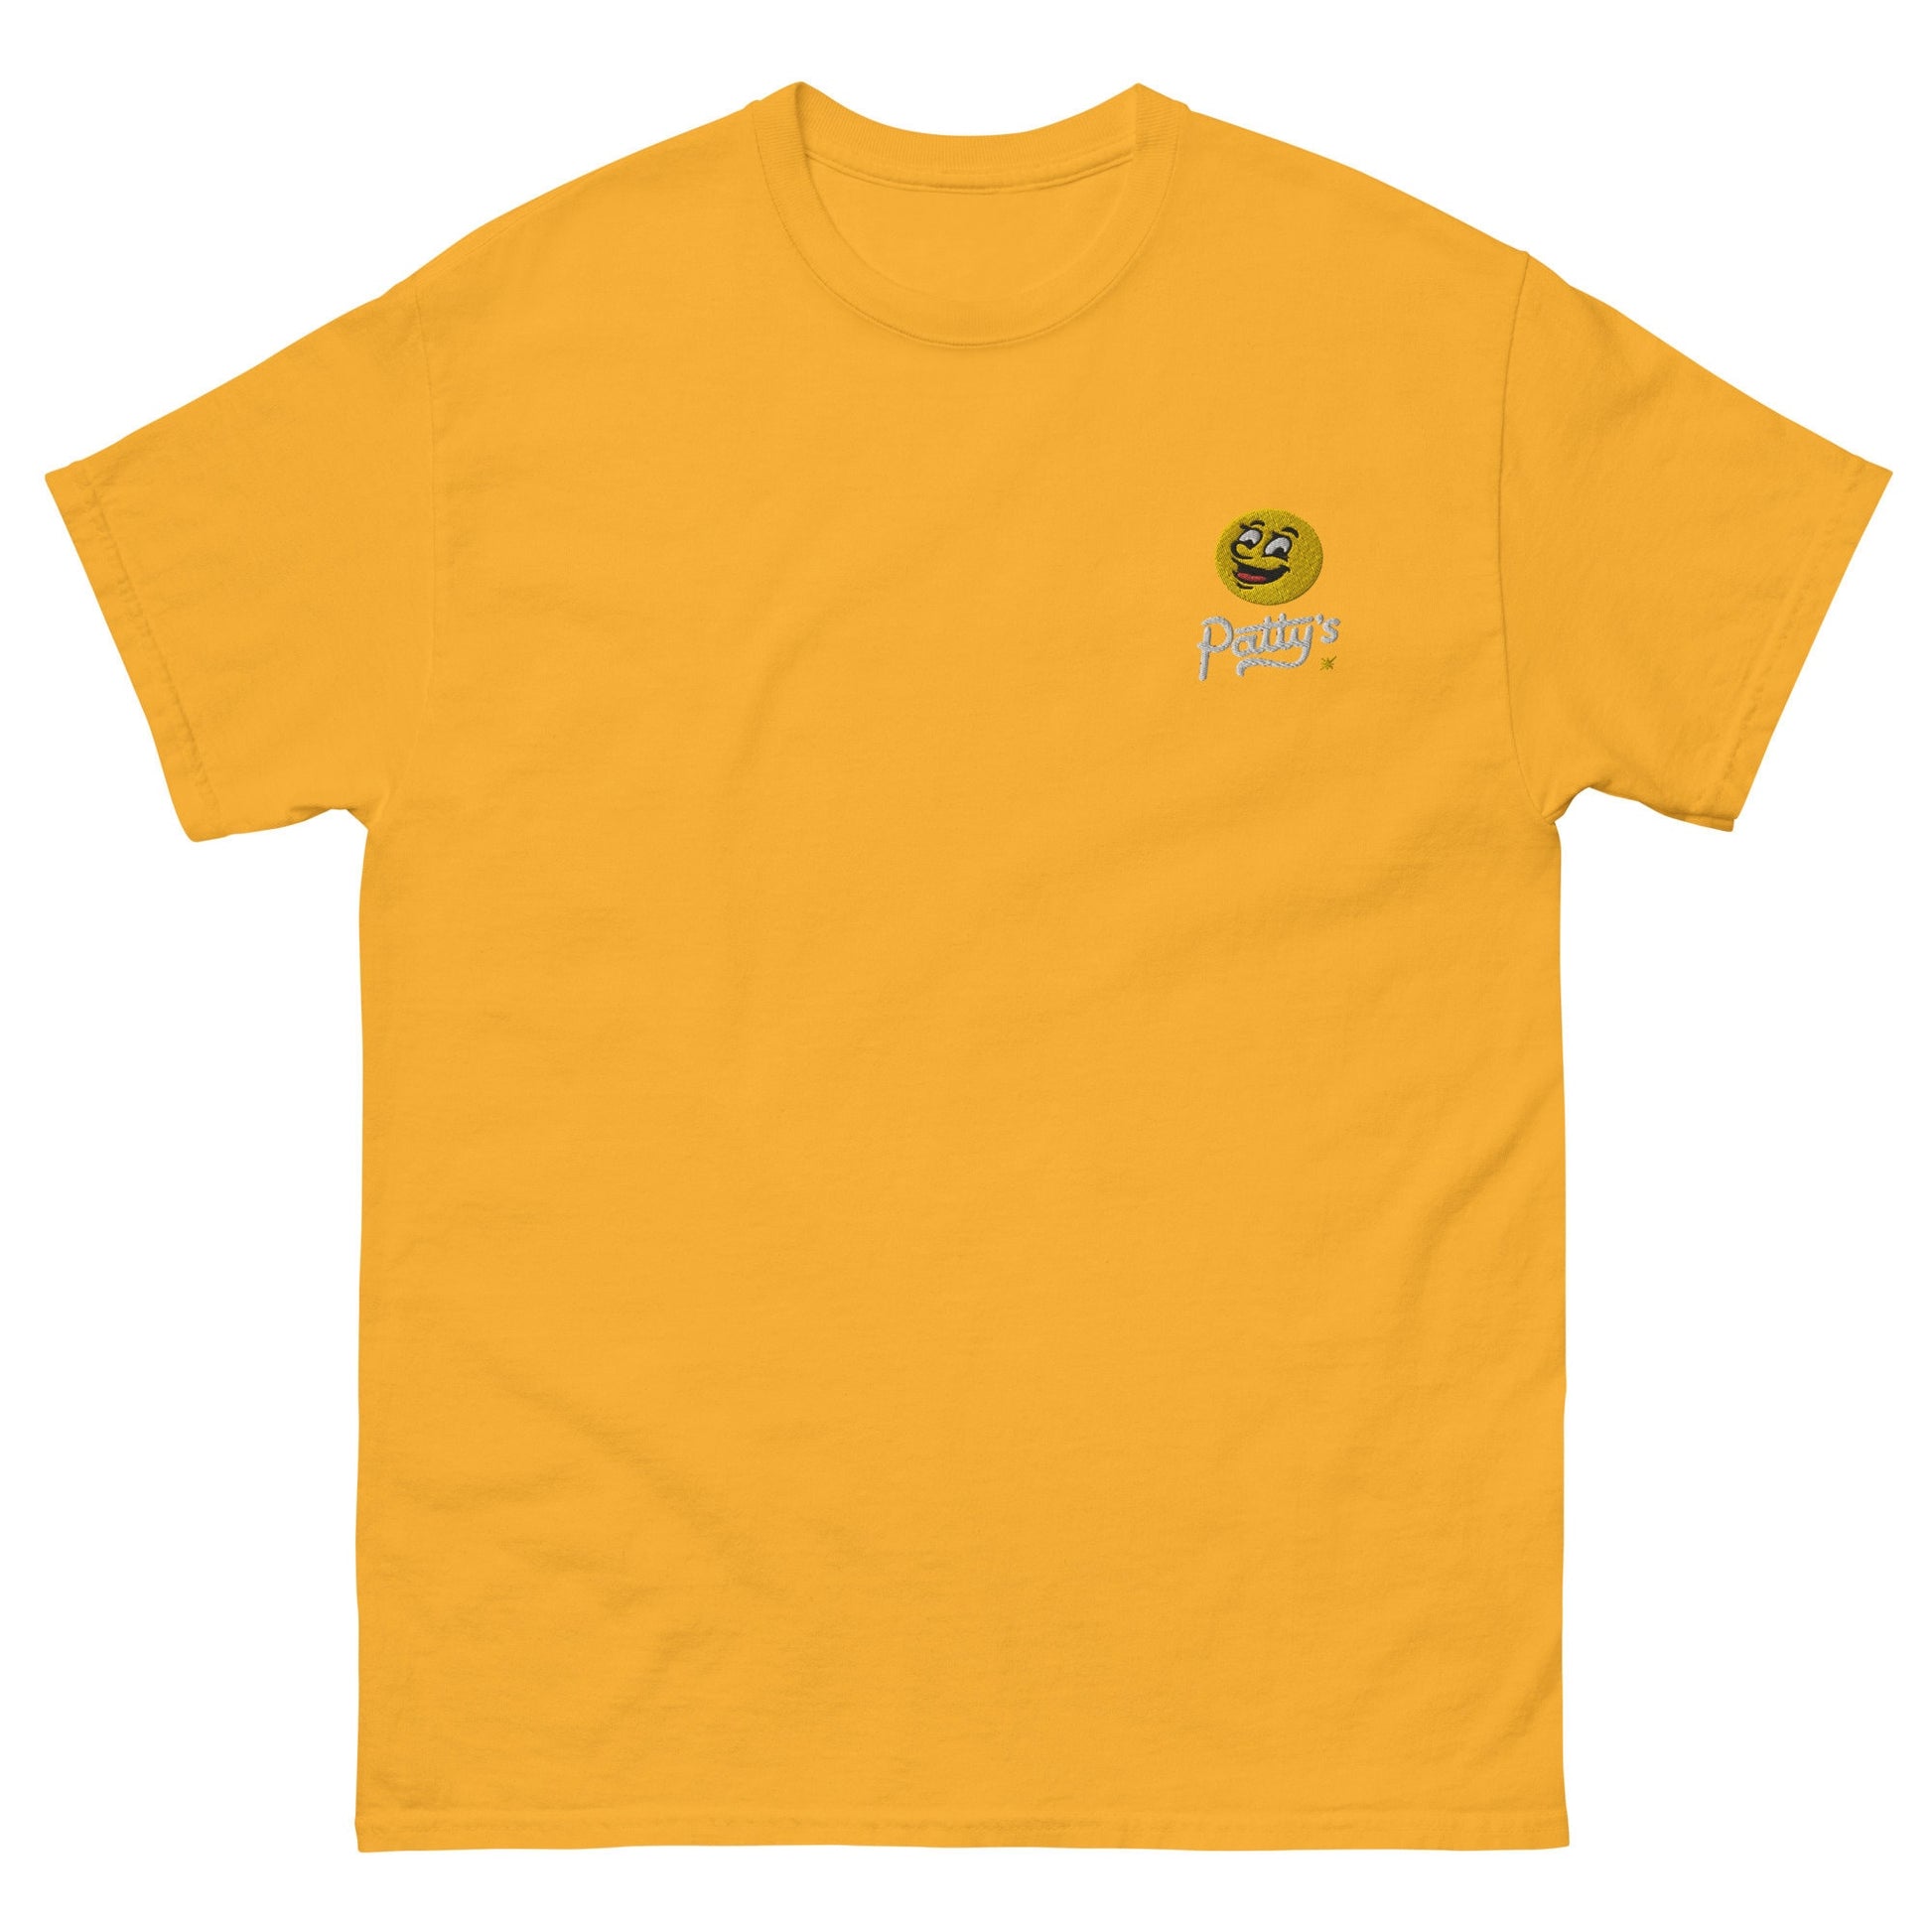 Patty&#39;s Service Station Shirt - The Gentlemen TV Show Inspired Merch - Embroidered Cotton Tee - Multiple colors